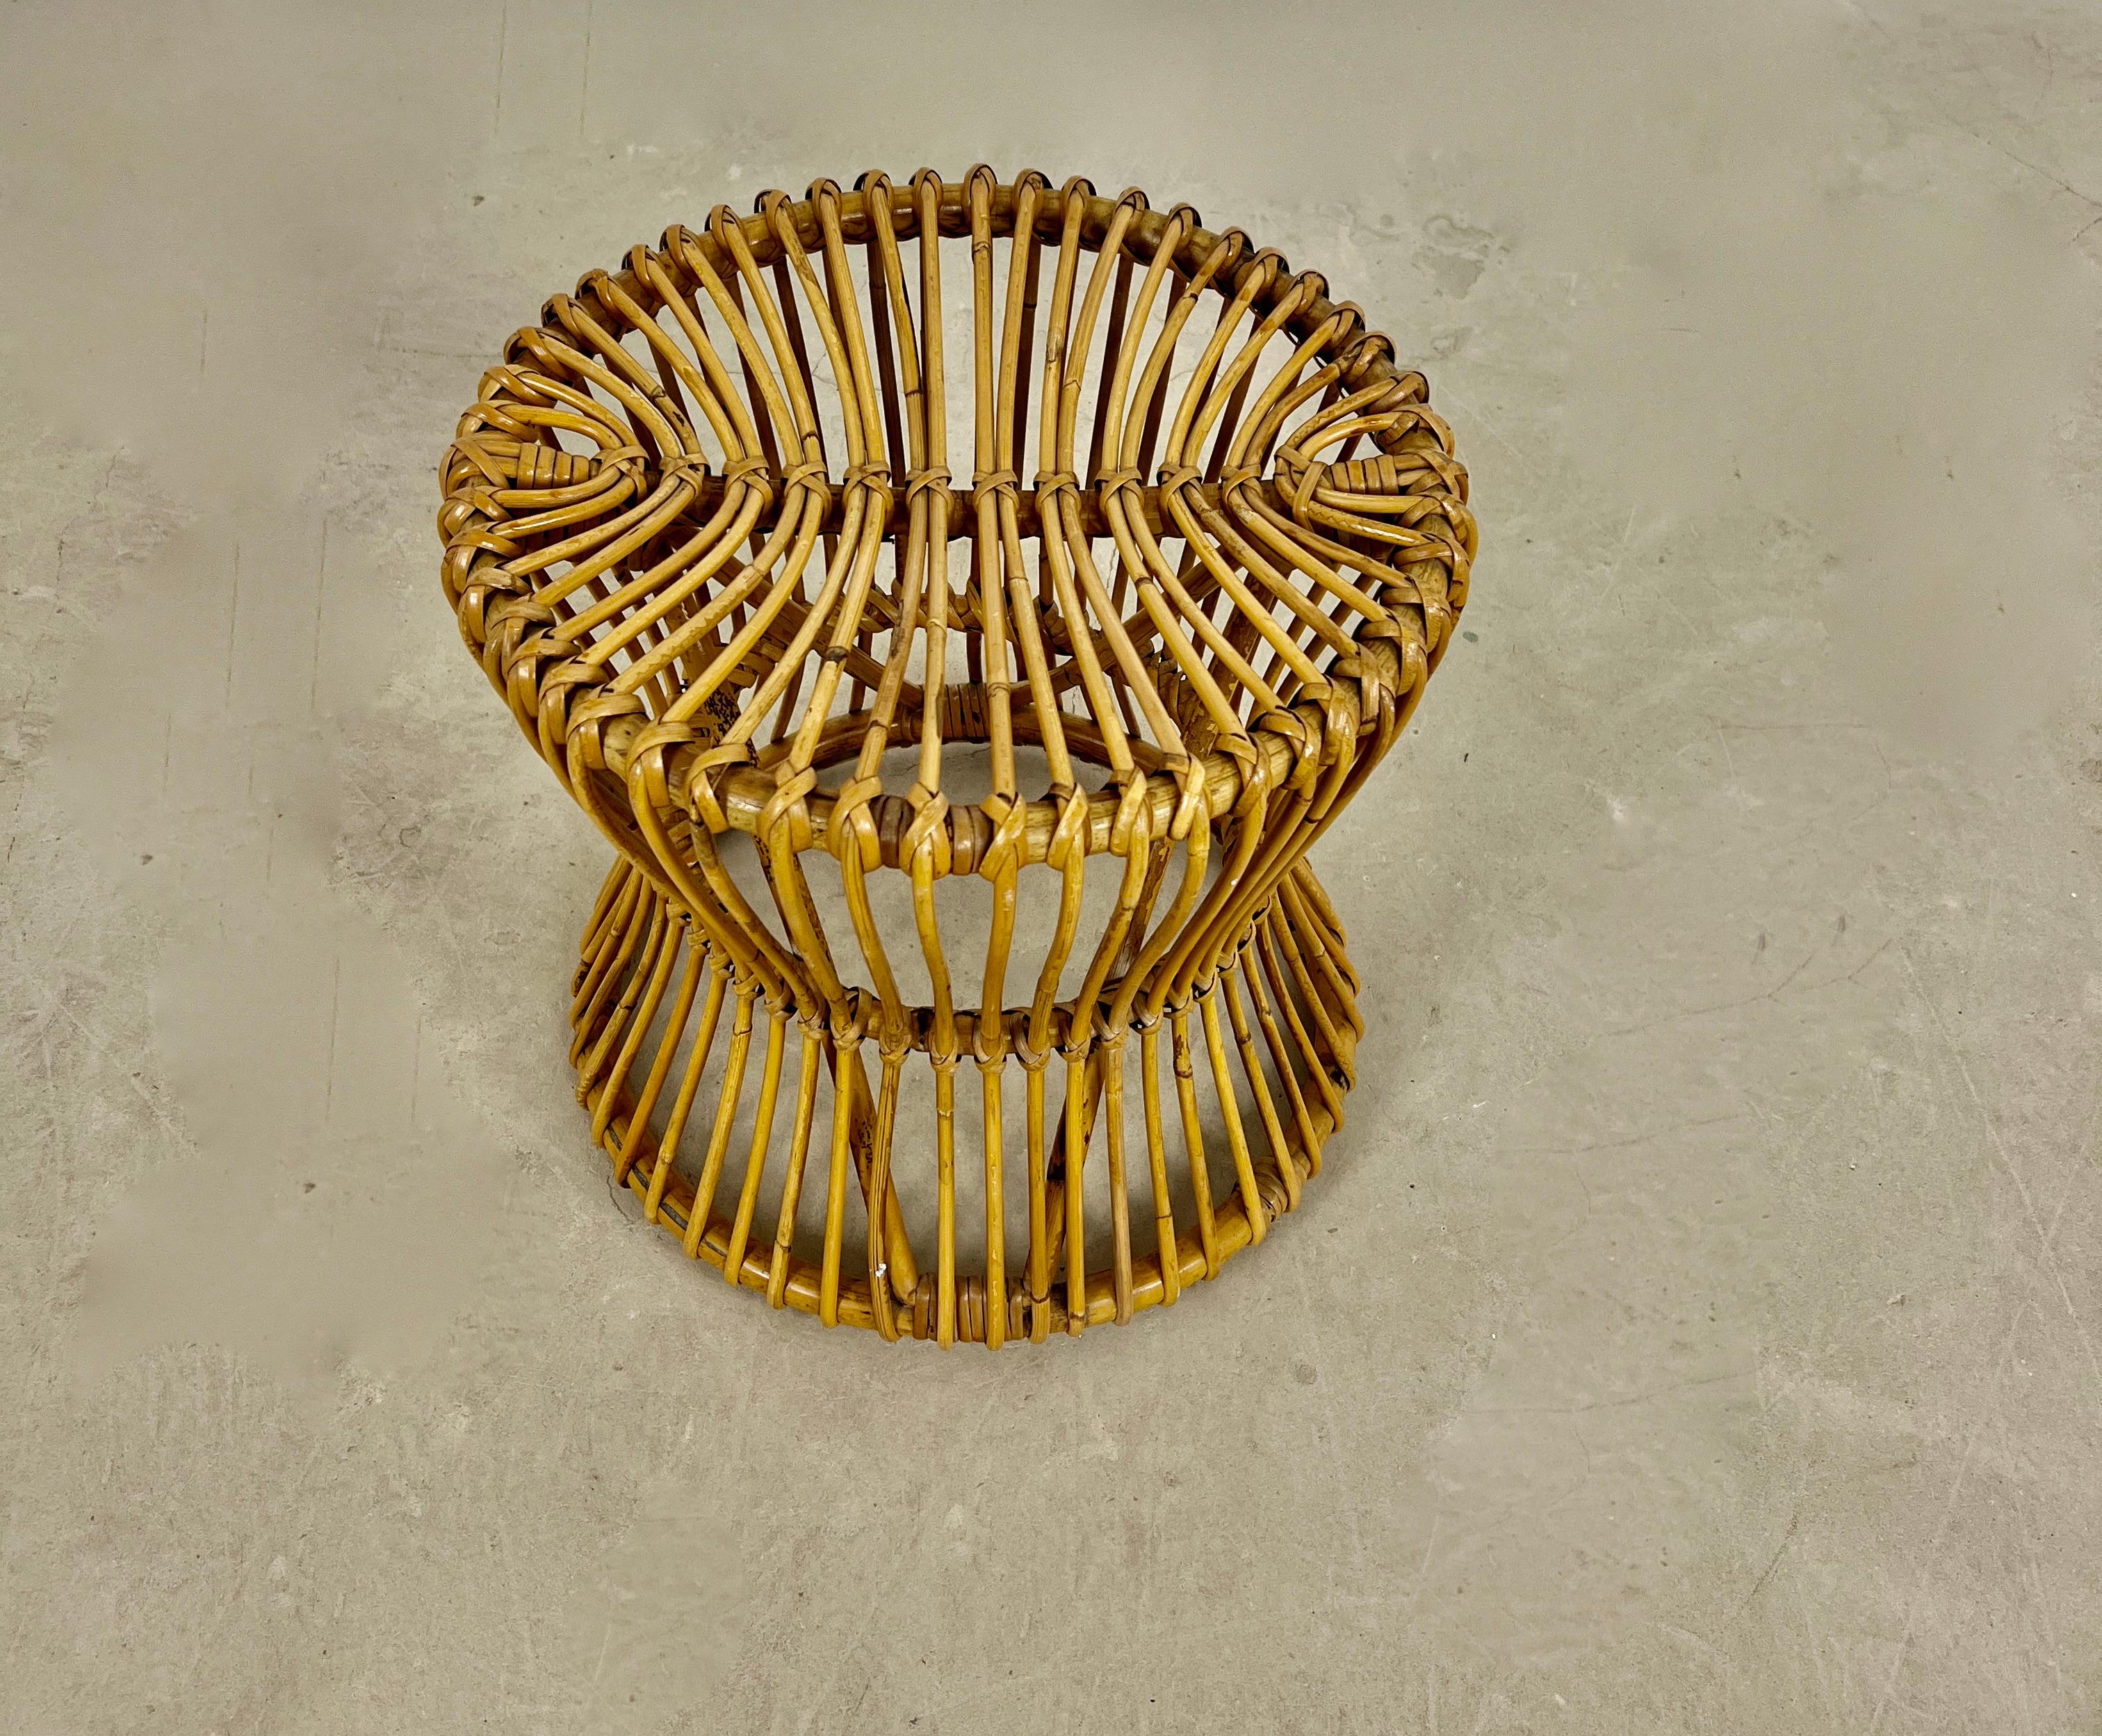 Italian rattan stool, Wear due to time and age of the stool.